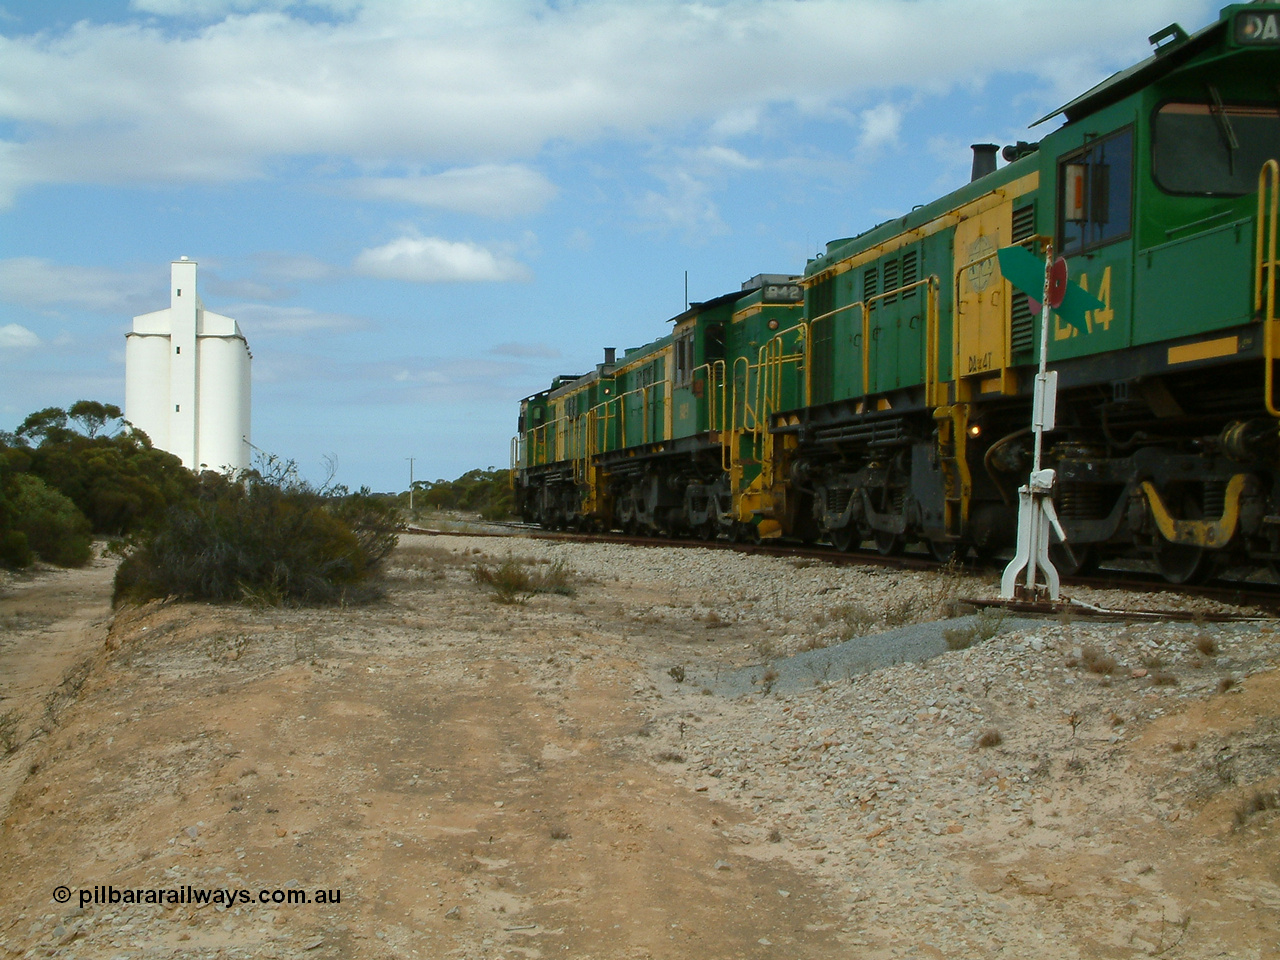 030409 122744
Kielpa, loaded grain train with 830 class unit 851 AE Goodwin ALCo model DL531 serial 84137, 851 has spent its entire operating career on the Eyre Peninsula, leads fellow 830 class 842 serial 84140 and a rebuilt unit DA 4 rumbles over the north end points heading south.
